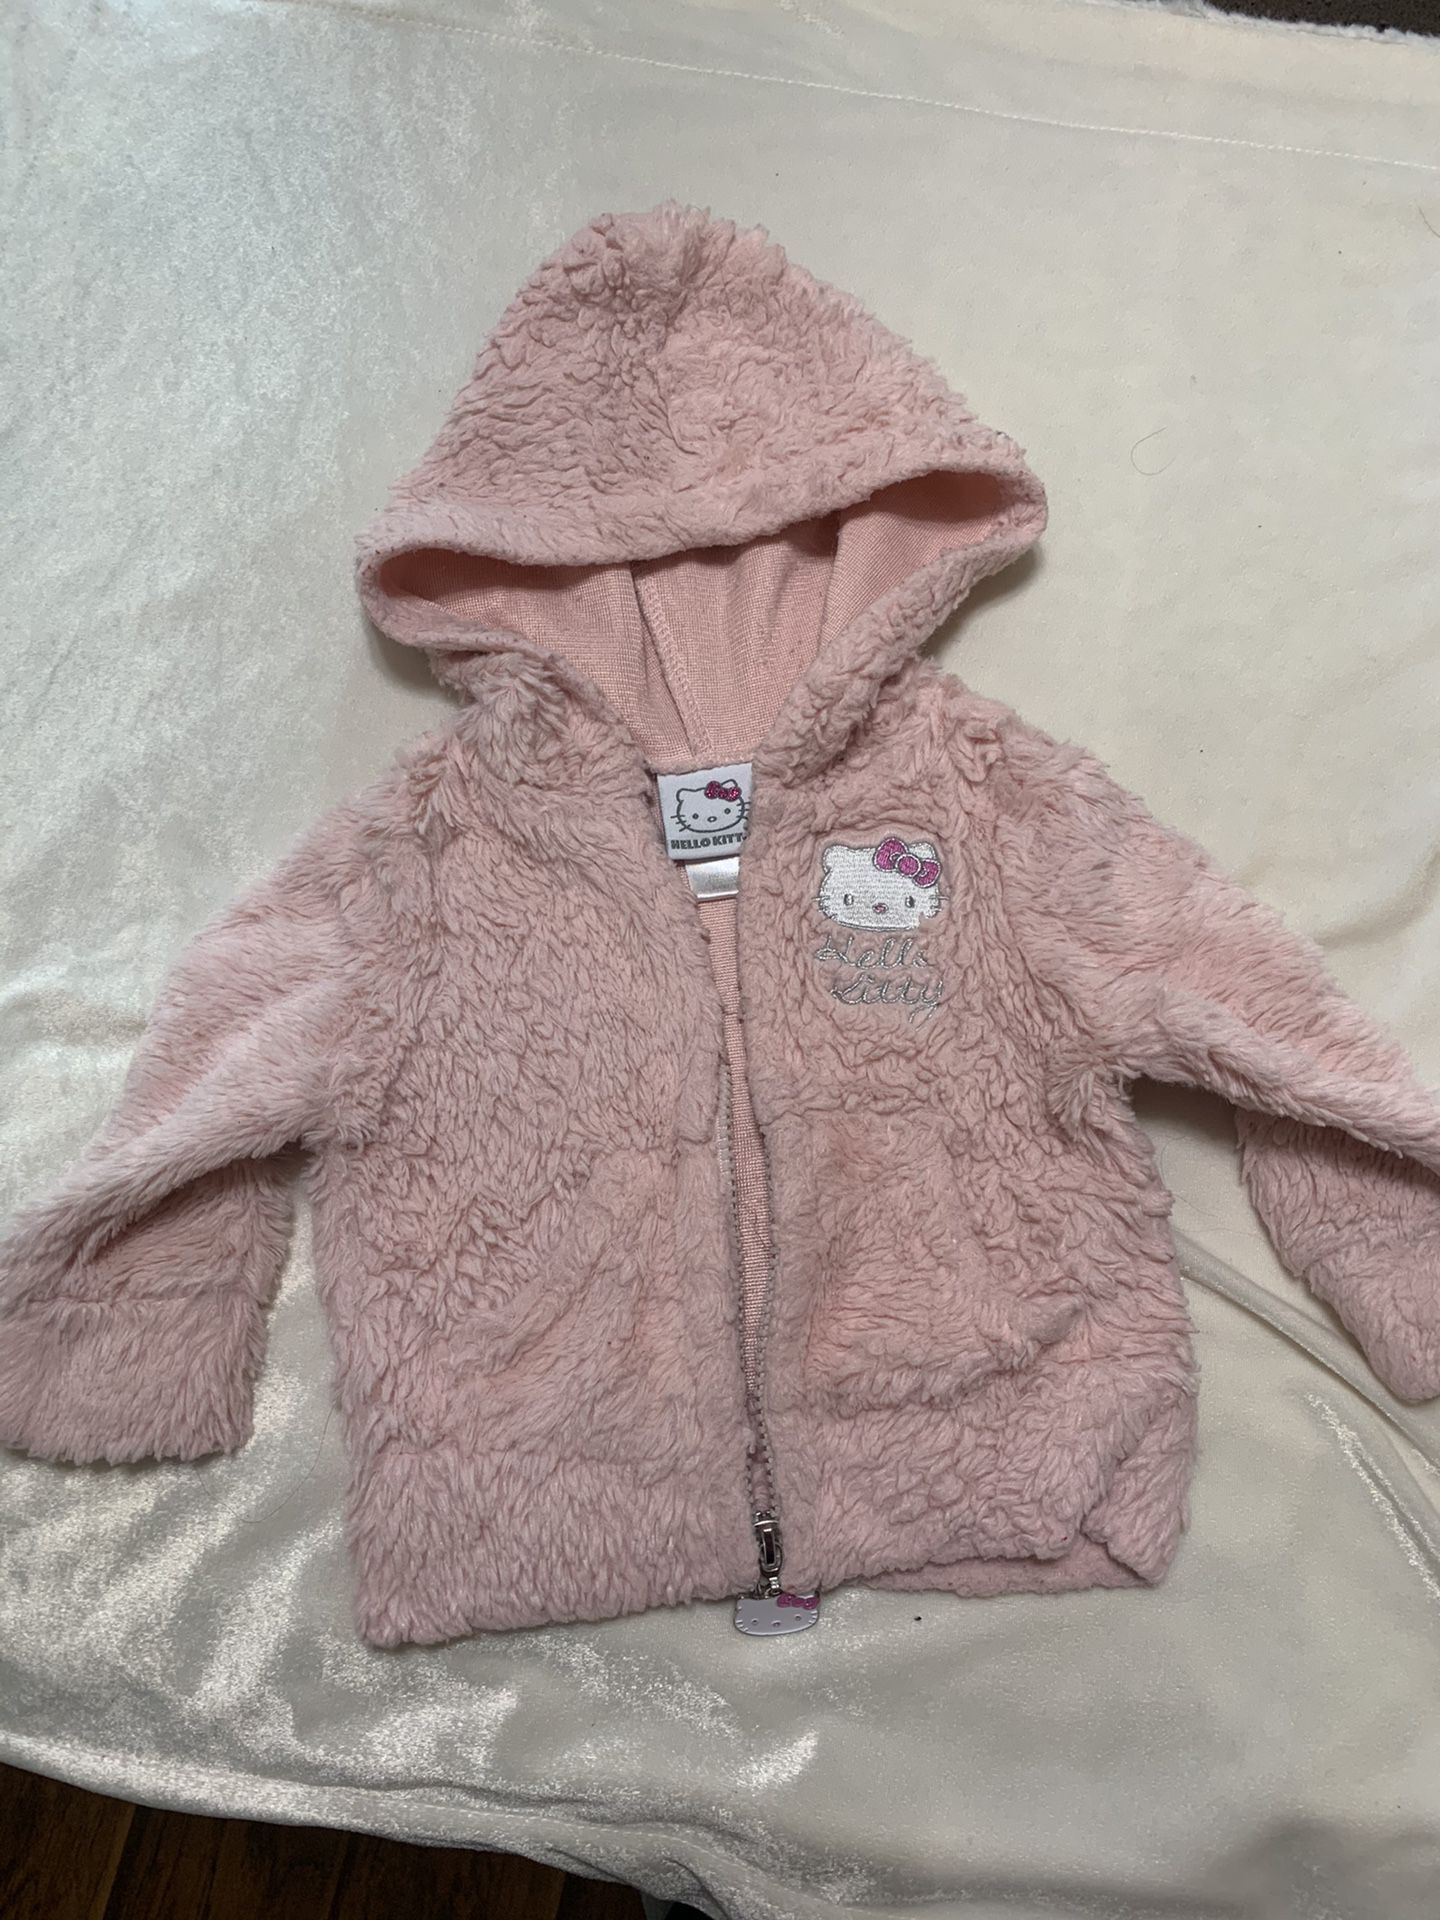 12 Month Hello Kitty pink furry sweater